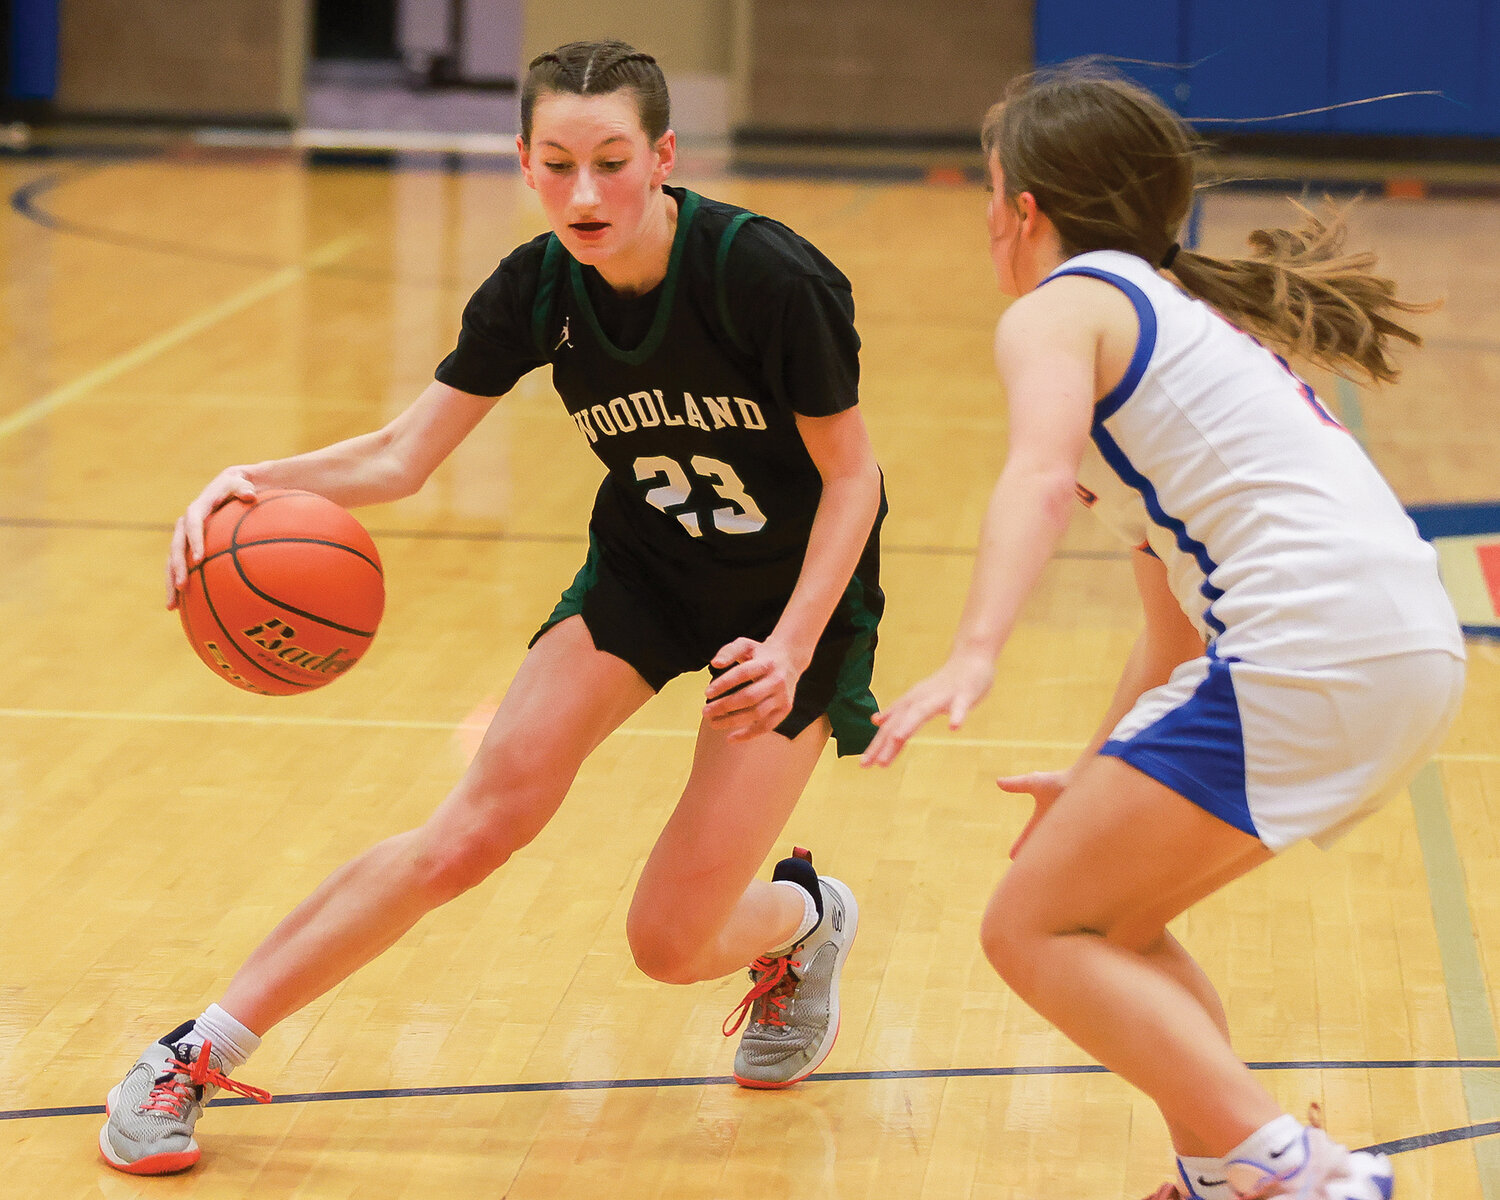 Woodland’s Lainey Haden attempts a crossover during the Beavers’ 60-35 loss to Ridgefield on Tuesday, Jan. 9.